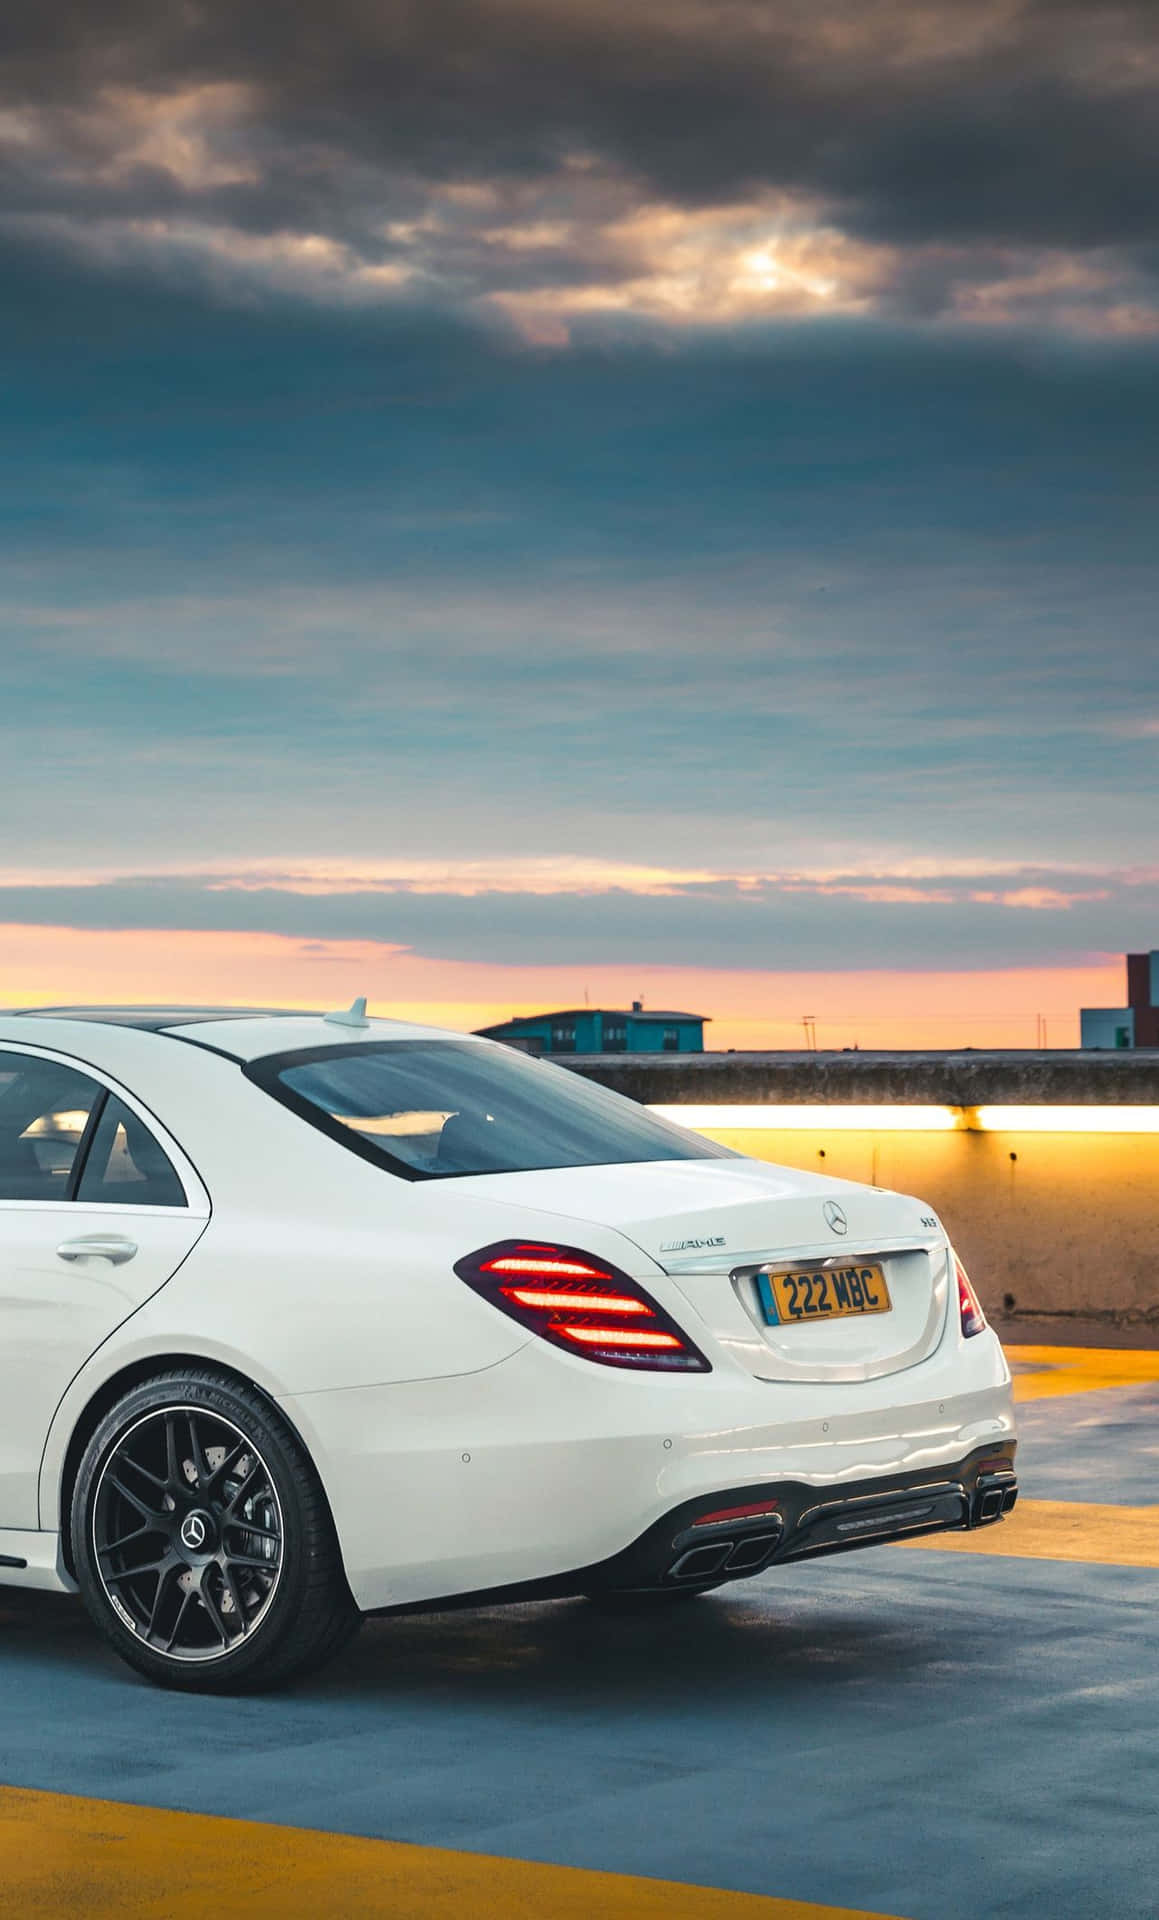 A classic Mercedes with modern features - now available as an iPhone Wallpaper